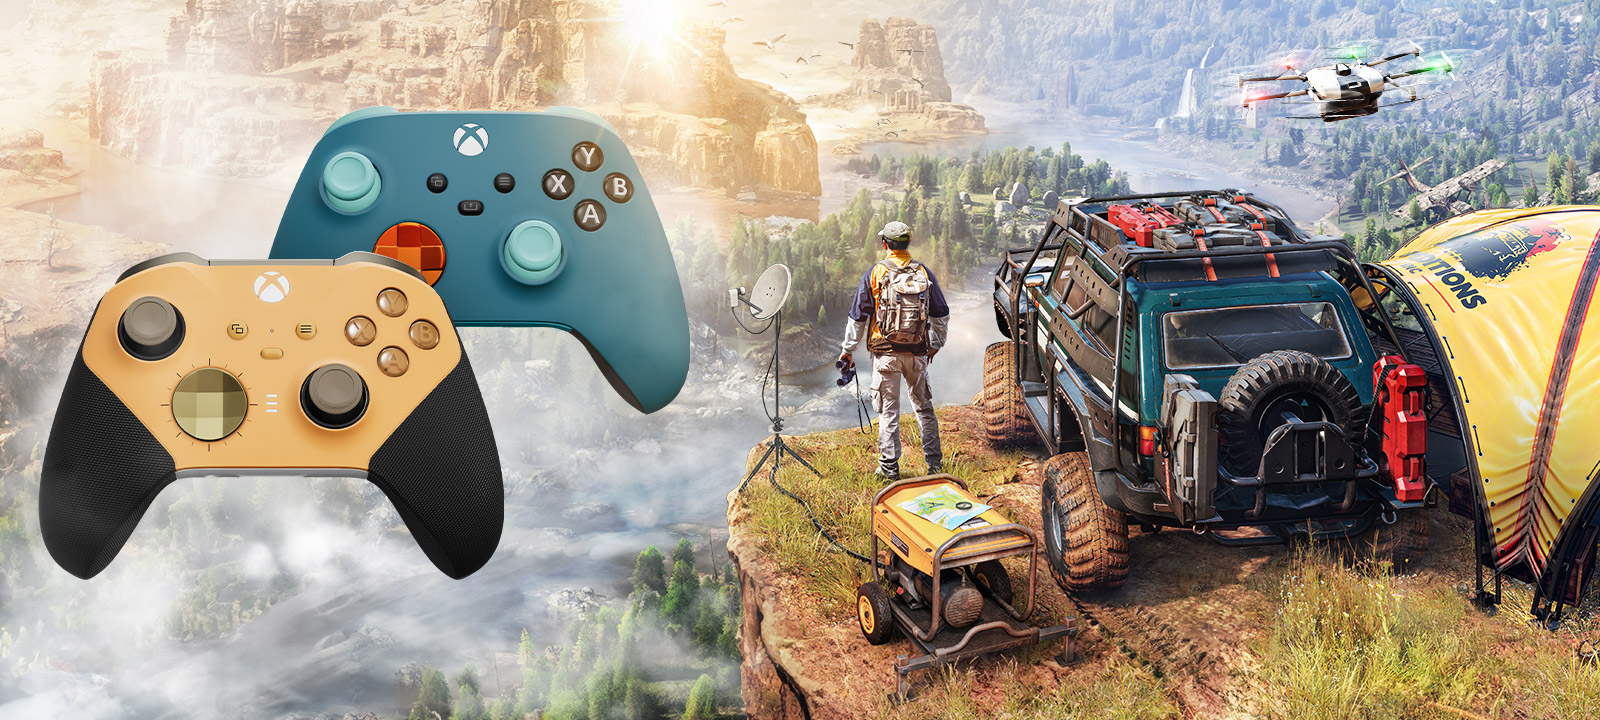 Expeditions: A Mudrunner game. An explorer looks out over a diverse landscape next to two controllers customized with Xbox Design Lab.